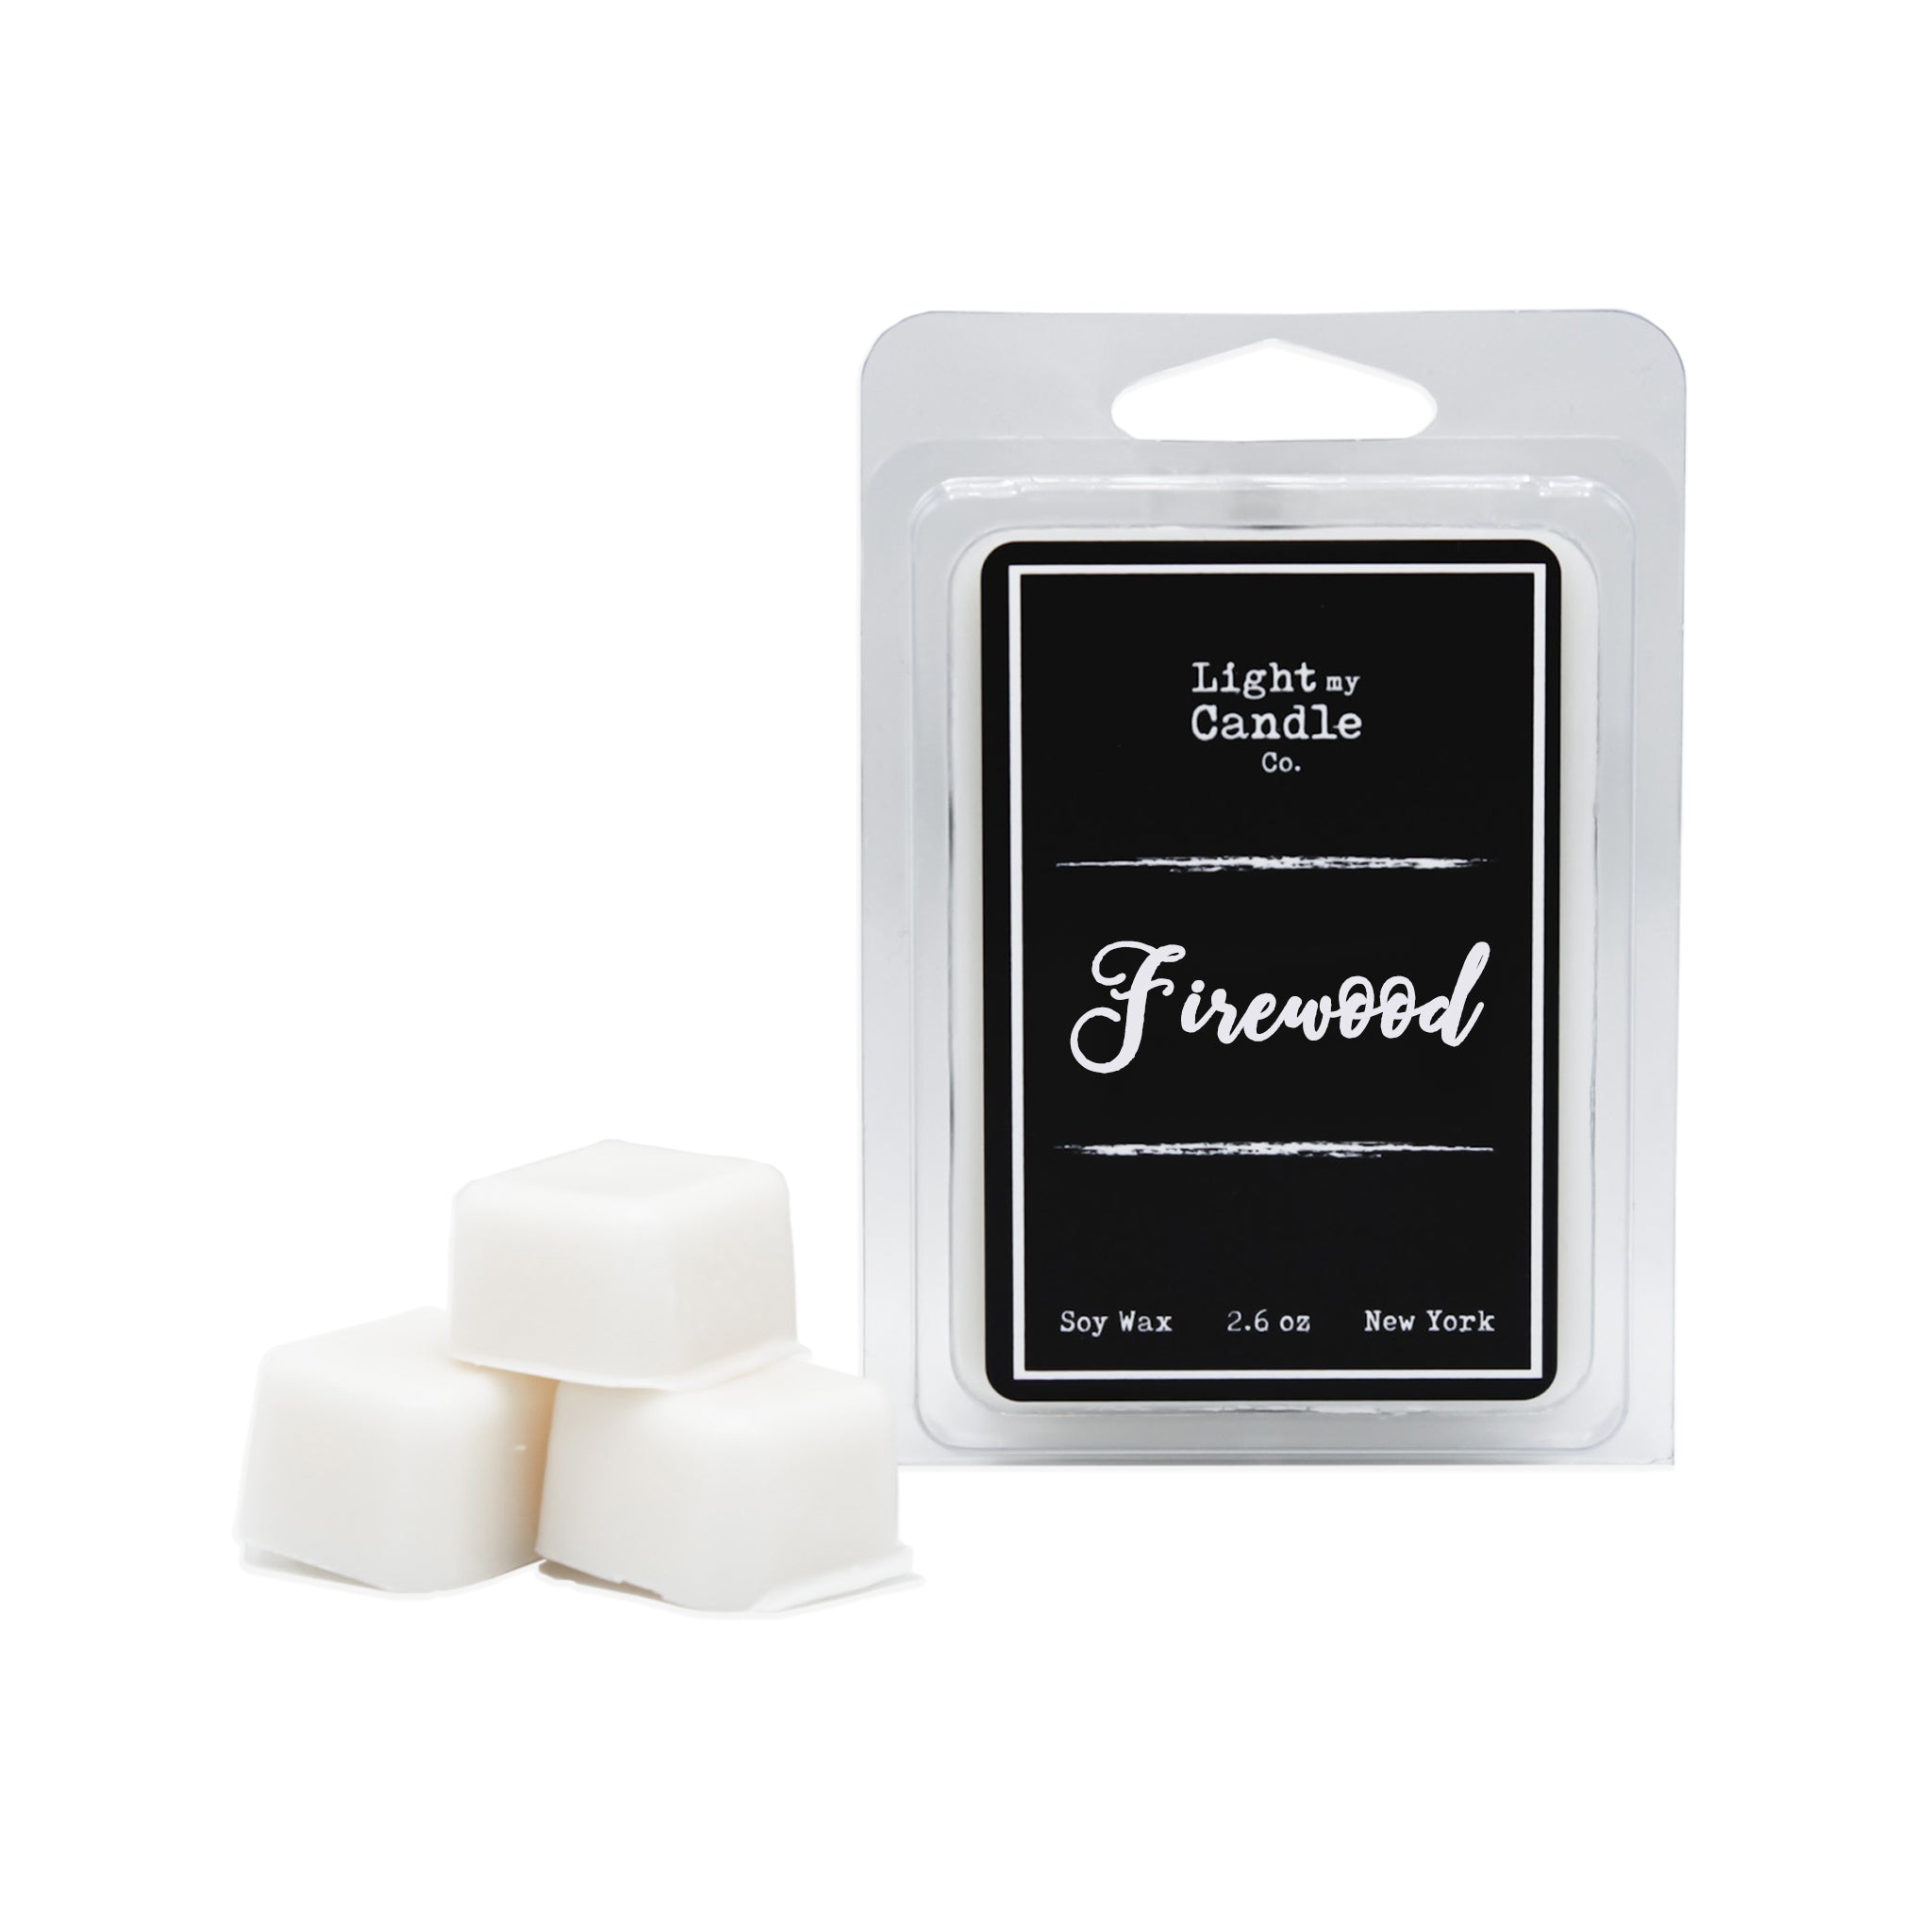 Firewood Soy Wax Melts – Light My Candle Co.